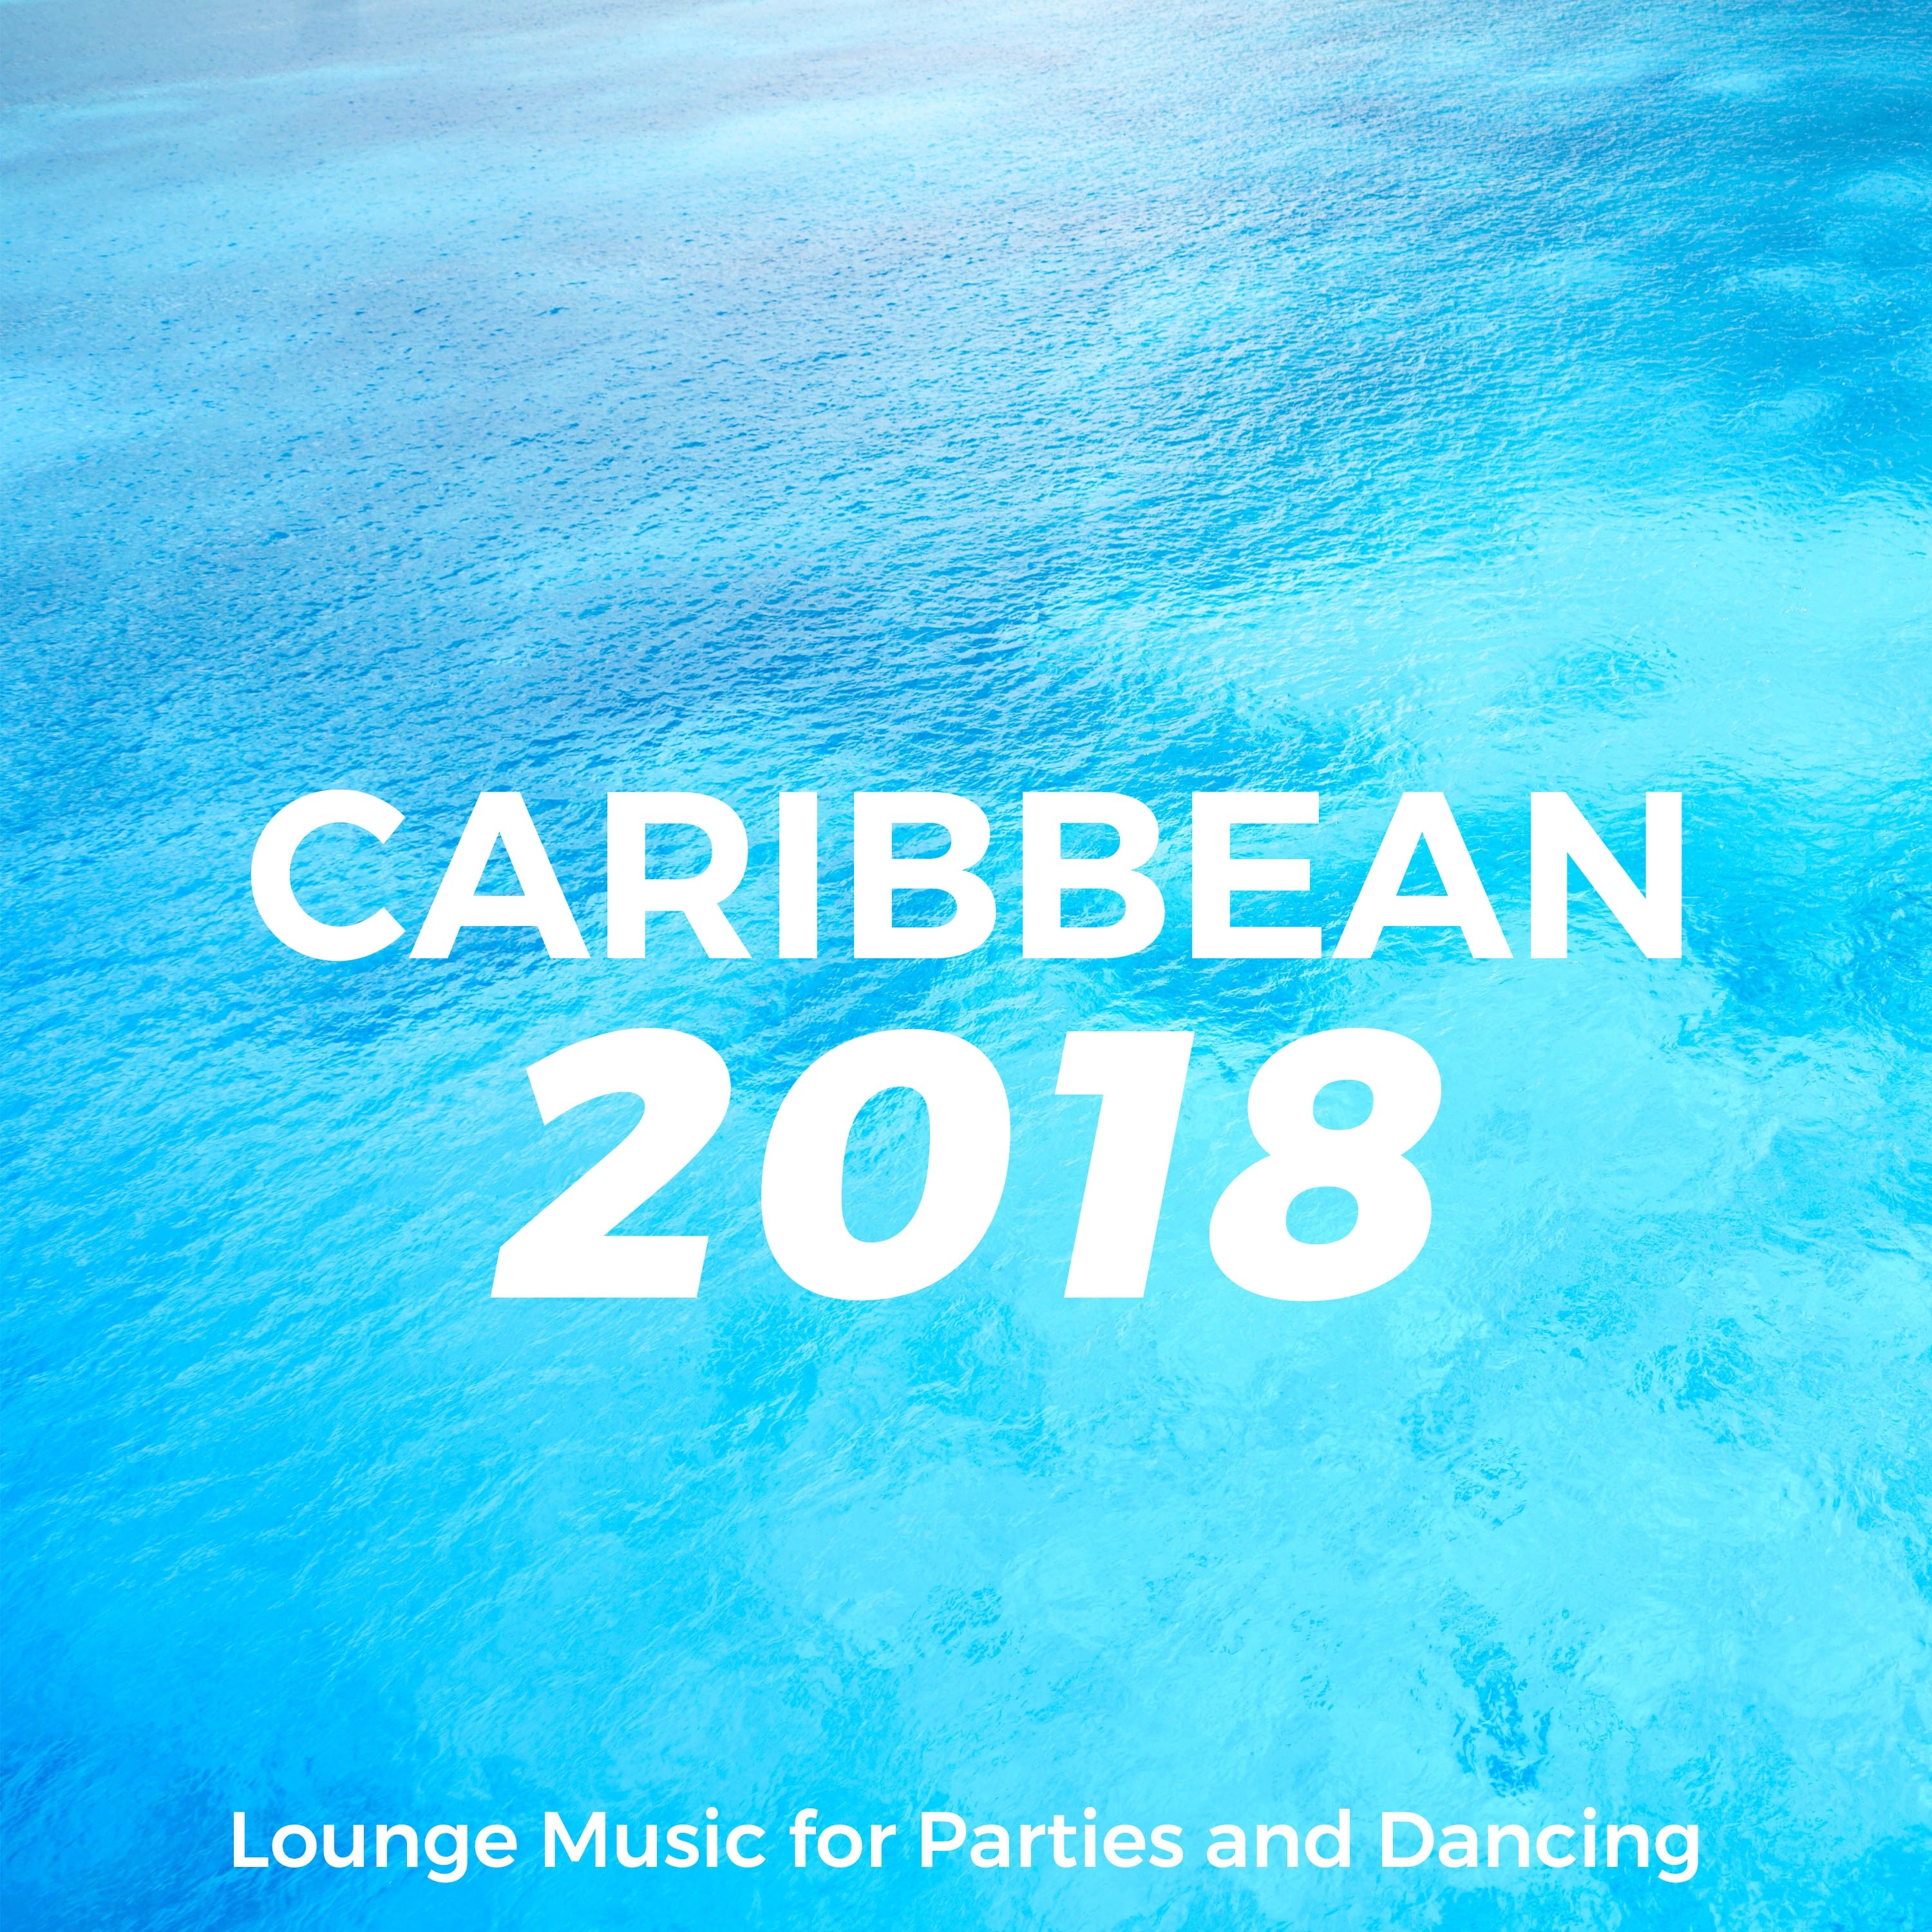 Caribbean 2018 CD - Lounge Music for Parties and Dancing